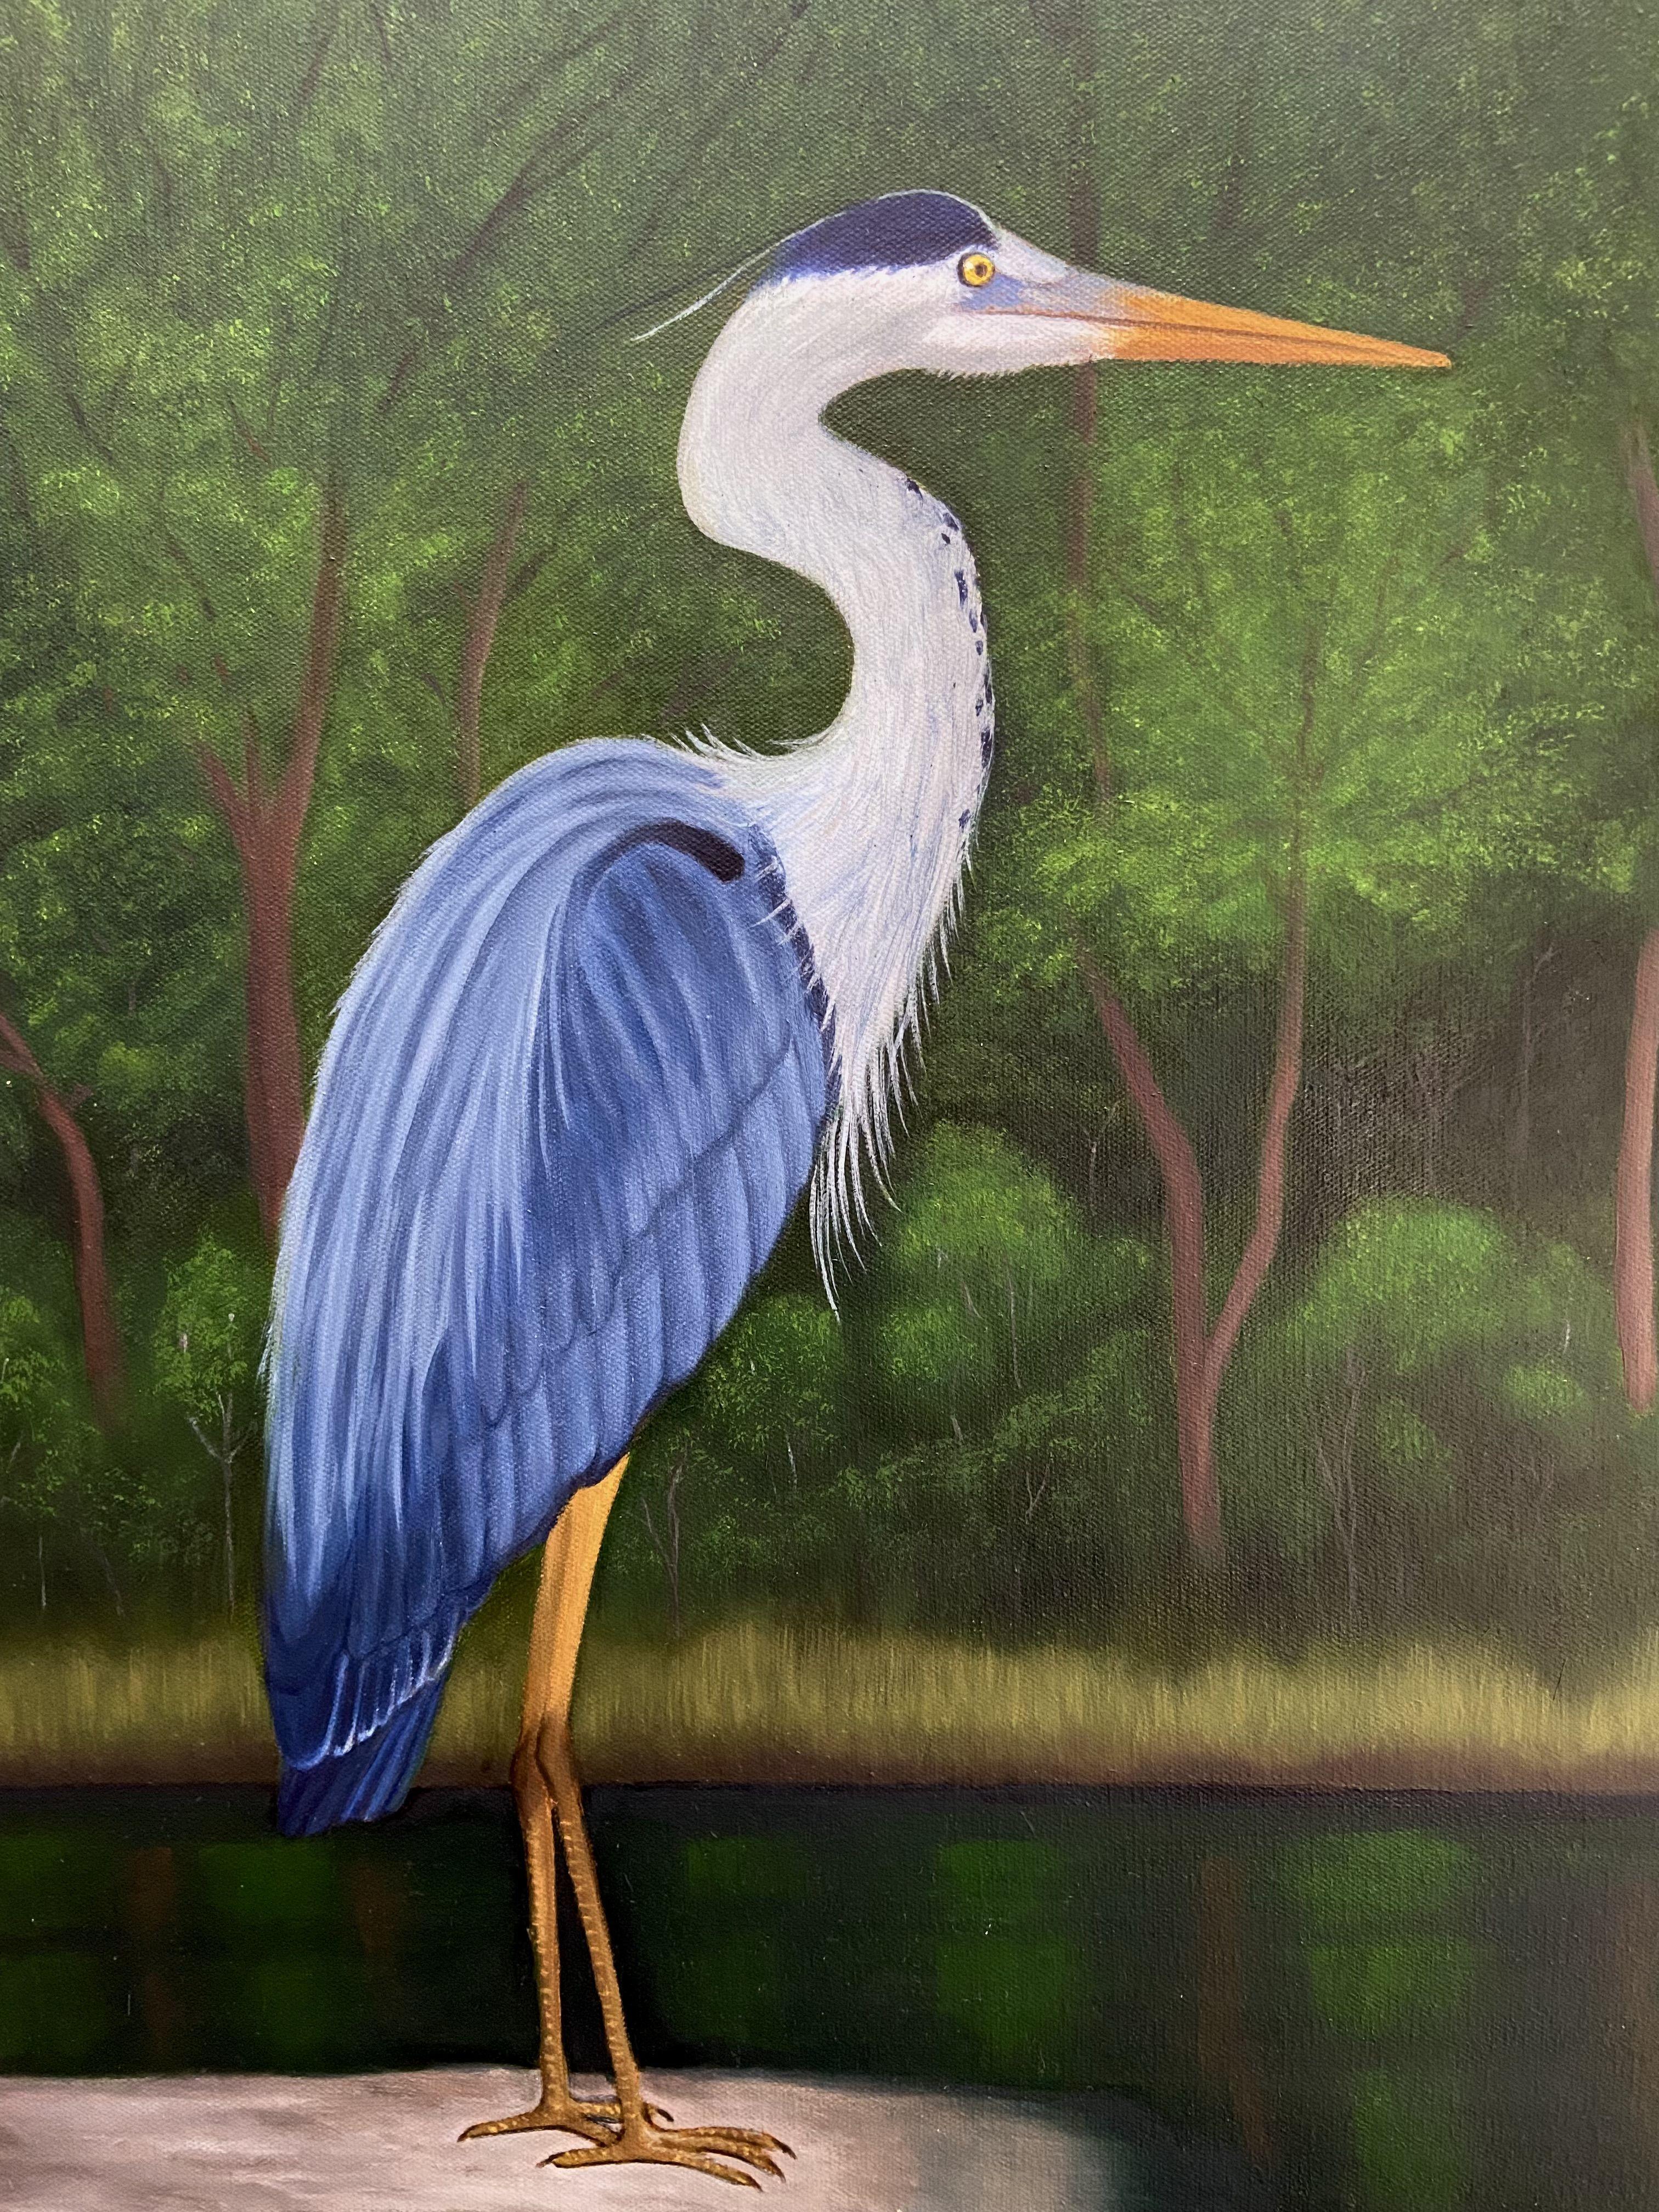 This is a Great Blue Heron on the watch, waiting for his next meal to appear.  This is an oil on canvas done on a 1.5" gallery wrap canvas so it will give your space a very nice statement.   This piece will look perfect in your home or place of